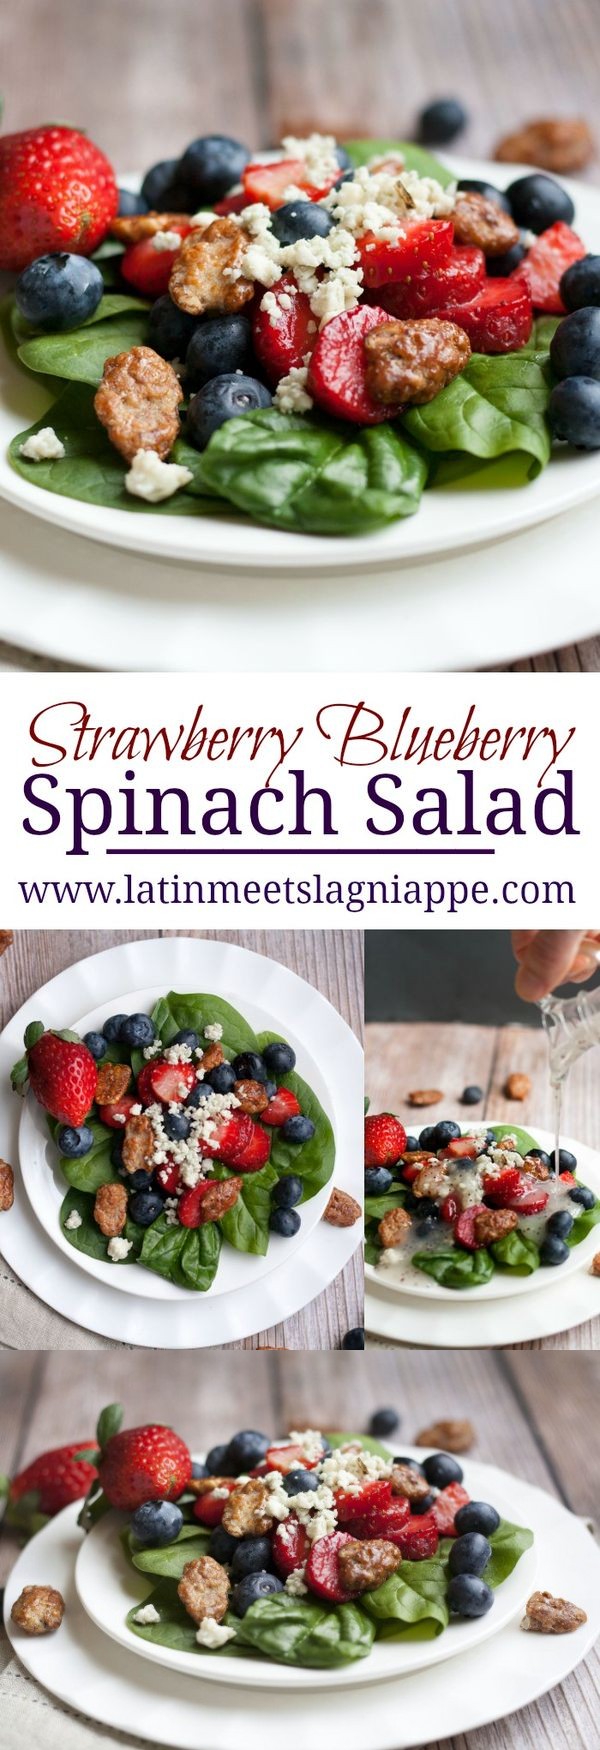 Strawberry Blueberry Spinach Salad